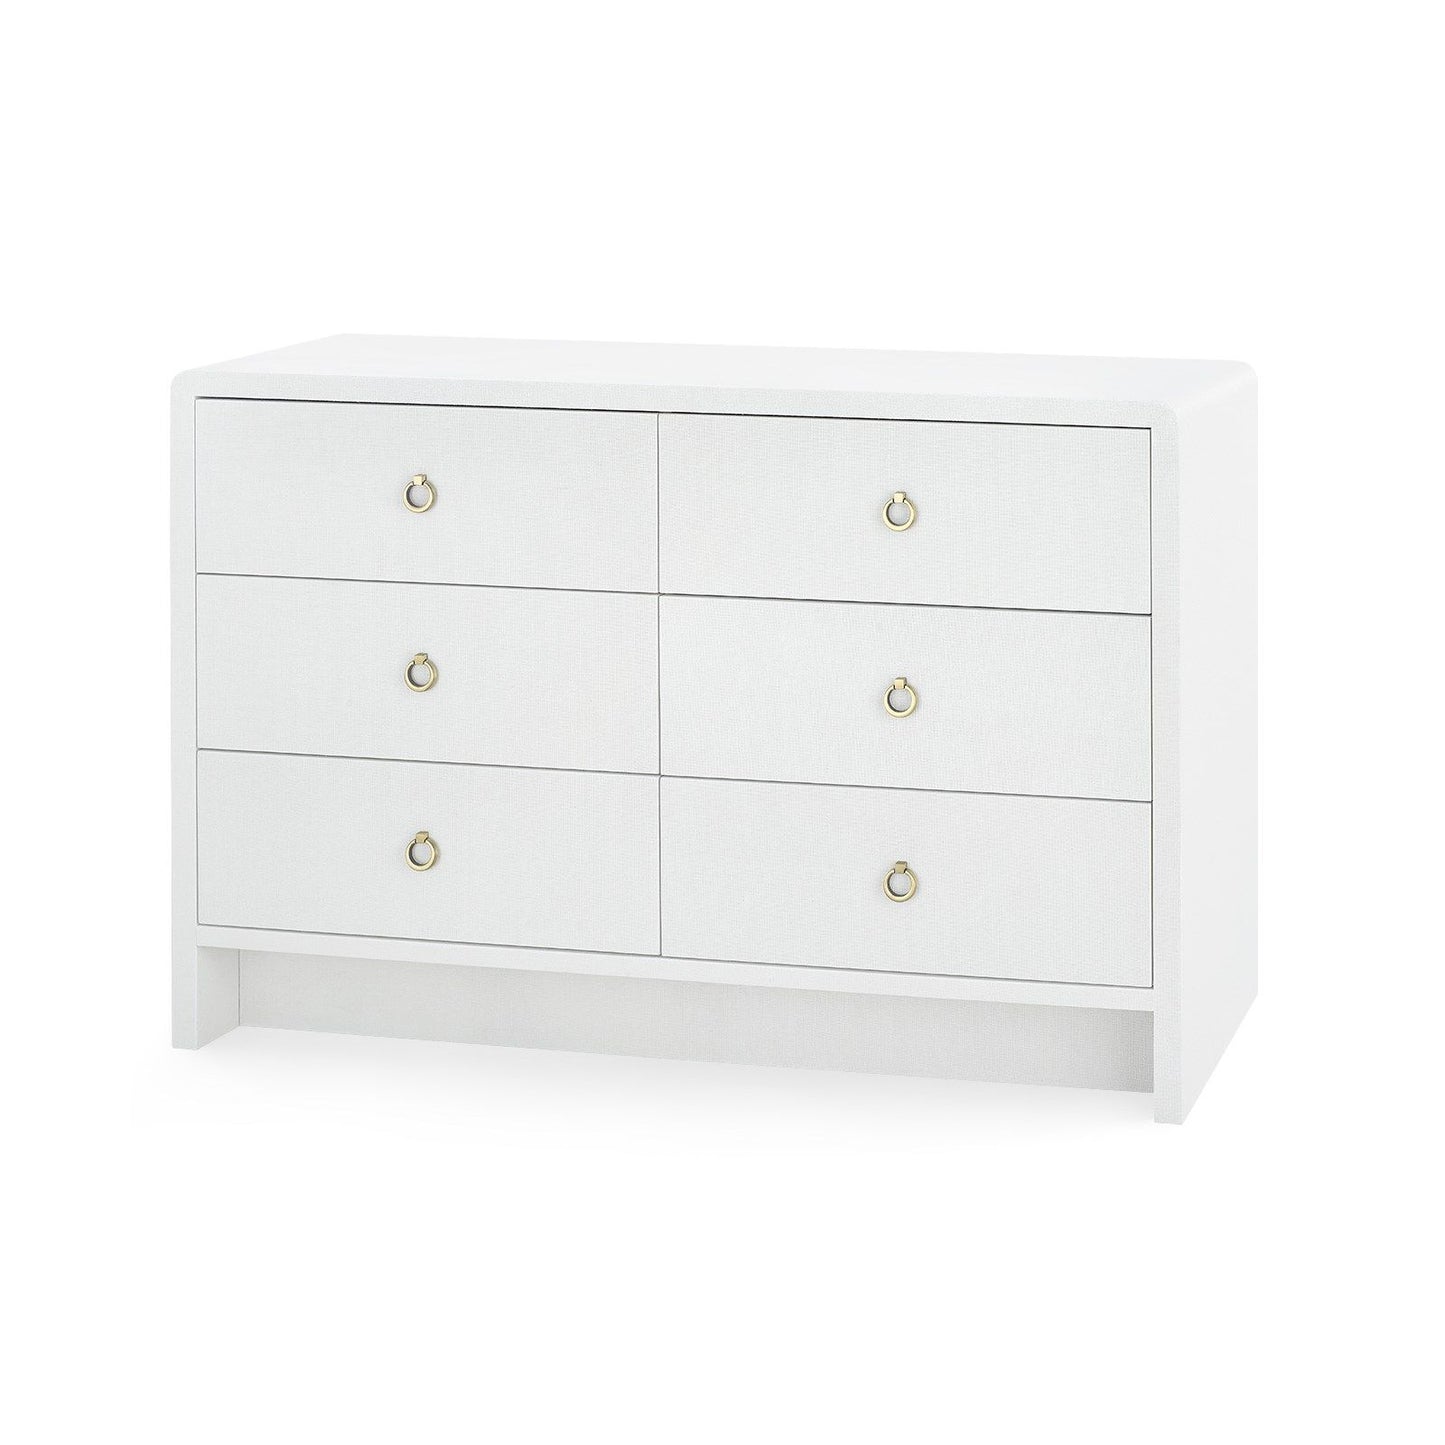 Load image into Gallery viewer, Bryant Extra Large 6-Drawer White LinenDrawer Bungalow 5  White Linen   Four Hands, Burke Decor, Mid Century Modern Furniture, Old Bones Furniture Company, Old Bones Co, Modern Mid Century, Designer Furniture, https://www.oldbonesco.com/
